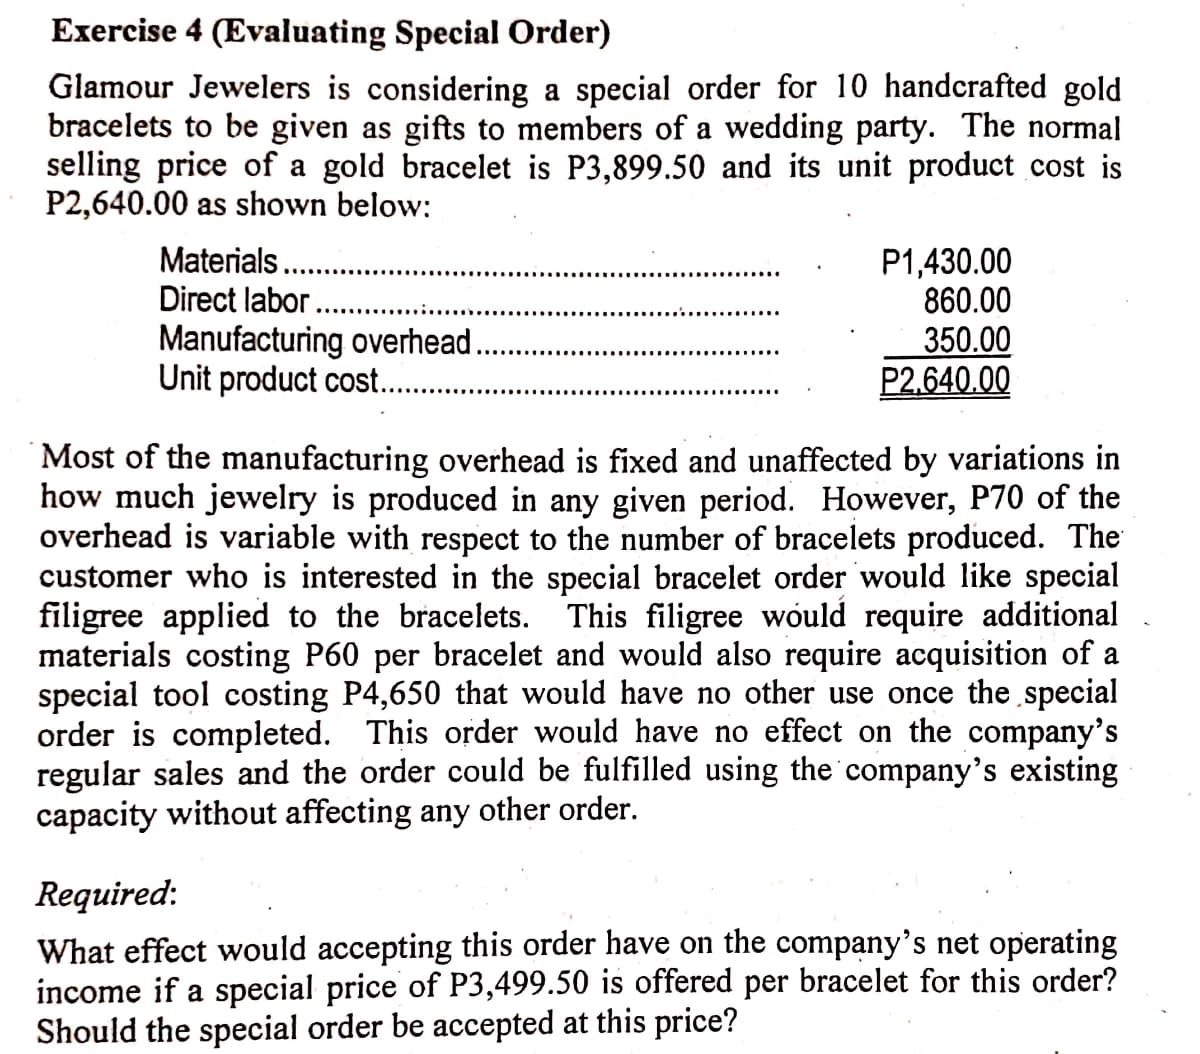 Exercise 4 (Evaluating Special Order)
Glamour Jewelers is considering a special order for 10 handcrafted gold
bracelets to be given as gifts to members of a wedding party. The normal
selling price of a gold bracelet is P3,899.50 and its unit product cost is
P2,640.00 as shown below:
Materials.
Direct labor..
P1,430.00
860.00
Manufacturing overhead.
Unit product cost...
350.00
P2,640.00
Most of the manufacturing overhead is fixed and unaffected by variations in
how much jewelry is produced in any given period. However, P70 of the
overhead is variable with respect to the number of bracelets produced. The
customer who is interested in the special bracelet order would like special
filigree applied to the bracelets. This filigree would require additional
materials costing P60 per bracelet and would also require acquisition of a
special tool costing P4,650 that would have no other use once the special
order is completed. This order would have no effect on the company's
regular sales and the order could be fulfilled using the company's existing
capacity without affecting any other order.
Required:
What effect would accepting this order have on the company's net operating
income if a special price of P3,499.50 is offered per bracelet for this order?
Should the special order be accepted at this price?
